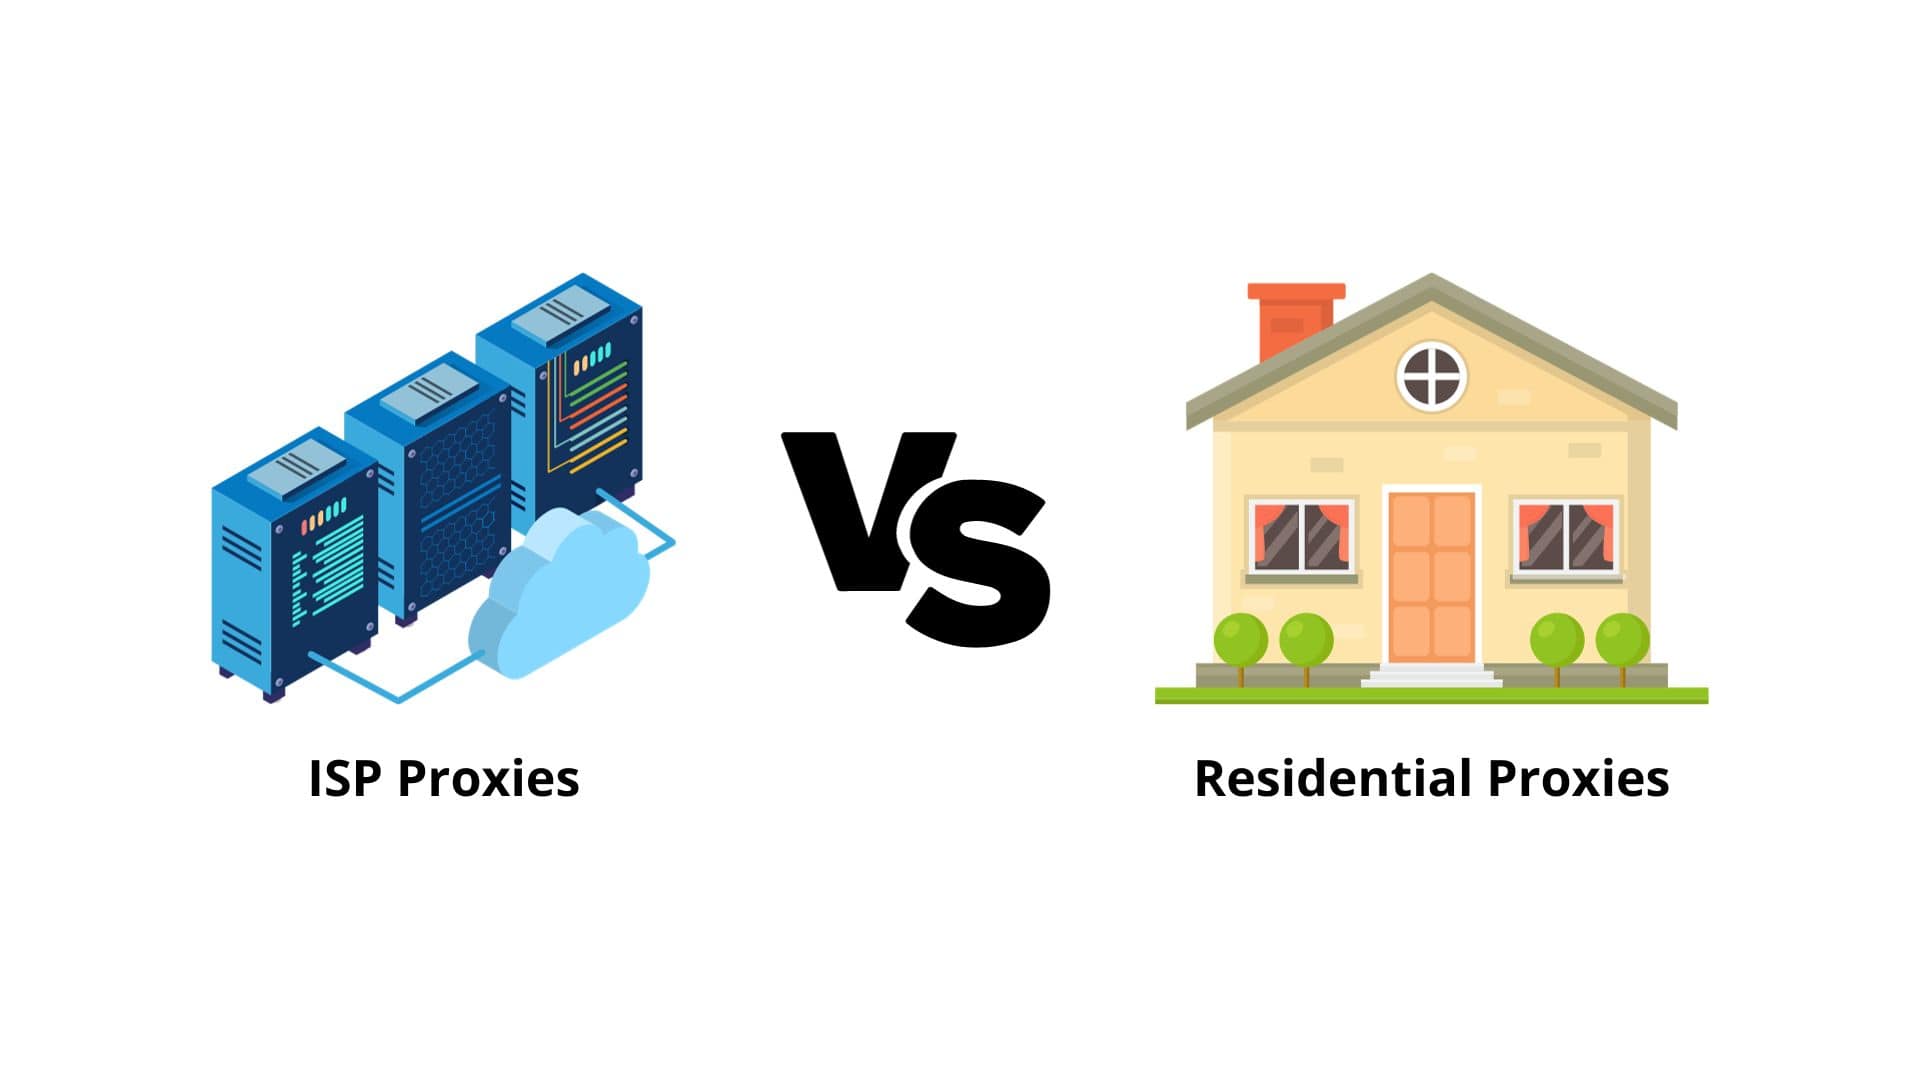 ISP Proxies vs Residential Proxies